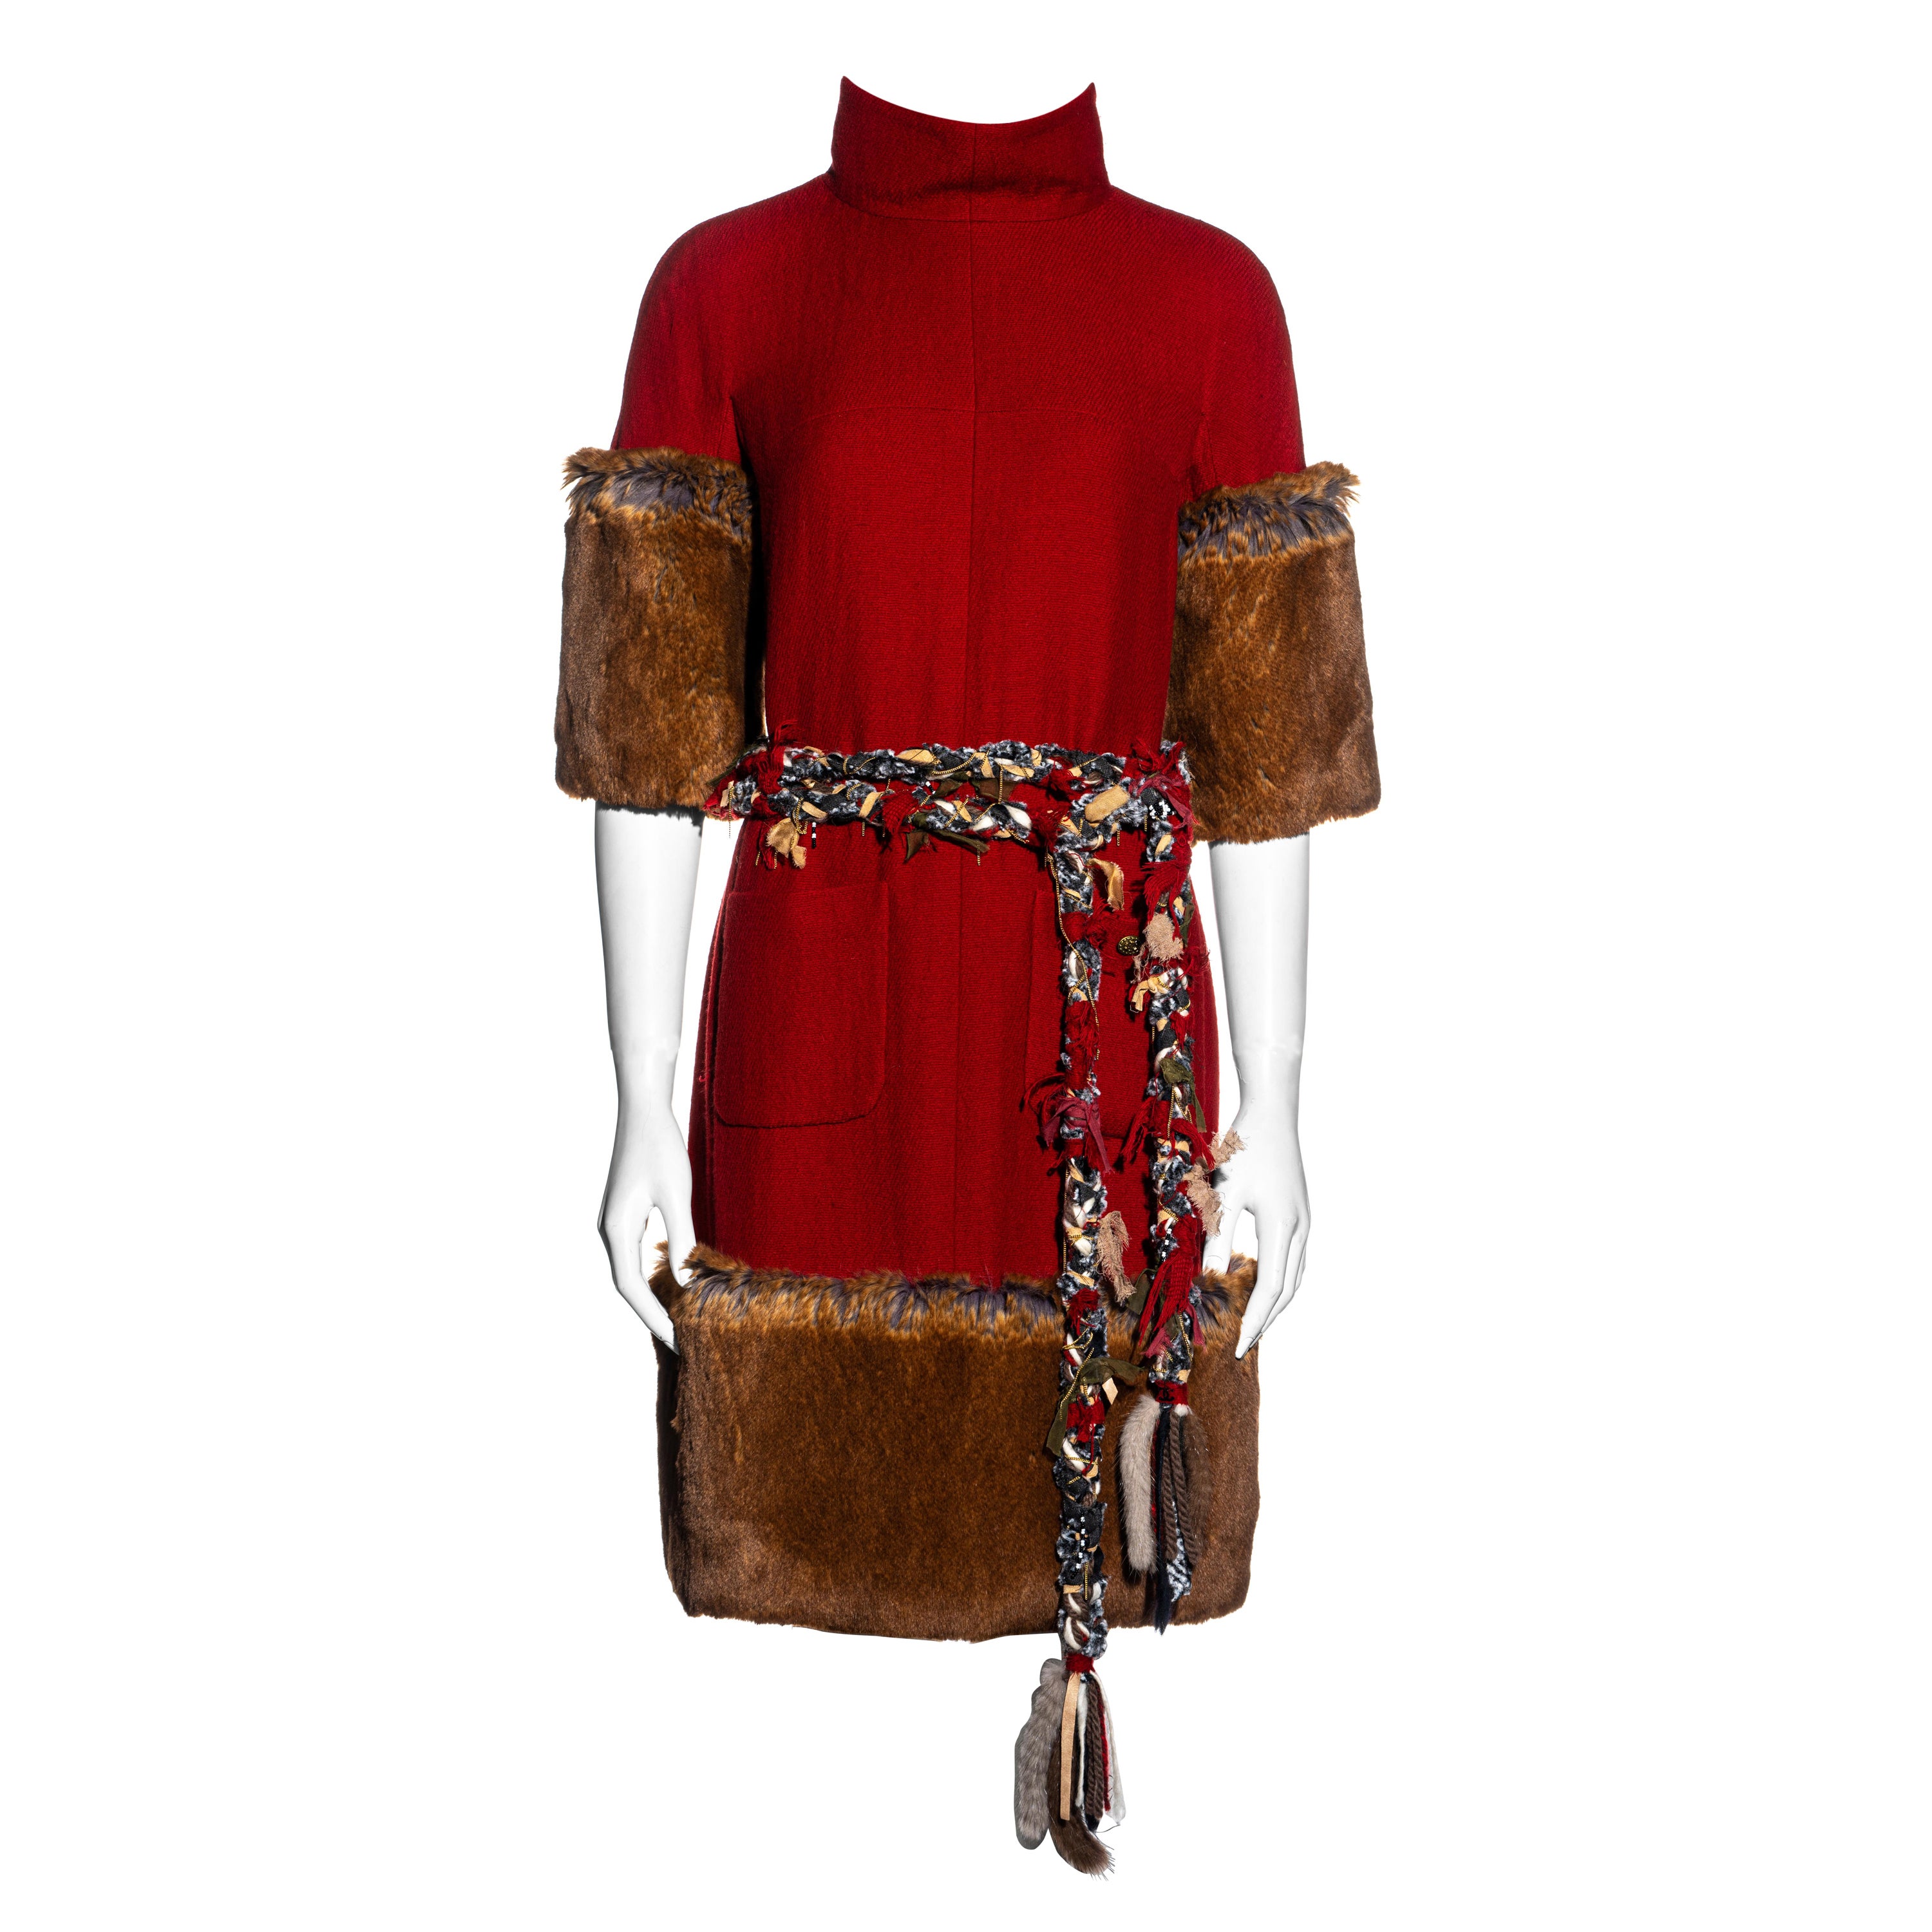 Chanel by Karl Lagerfeld red cashmere wool and faux fur dress, fw 2010